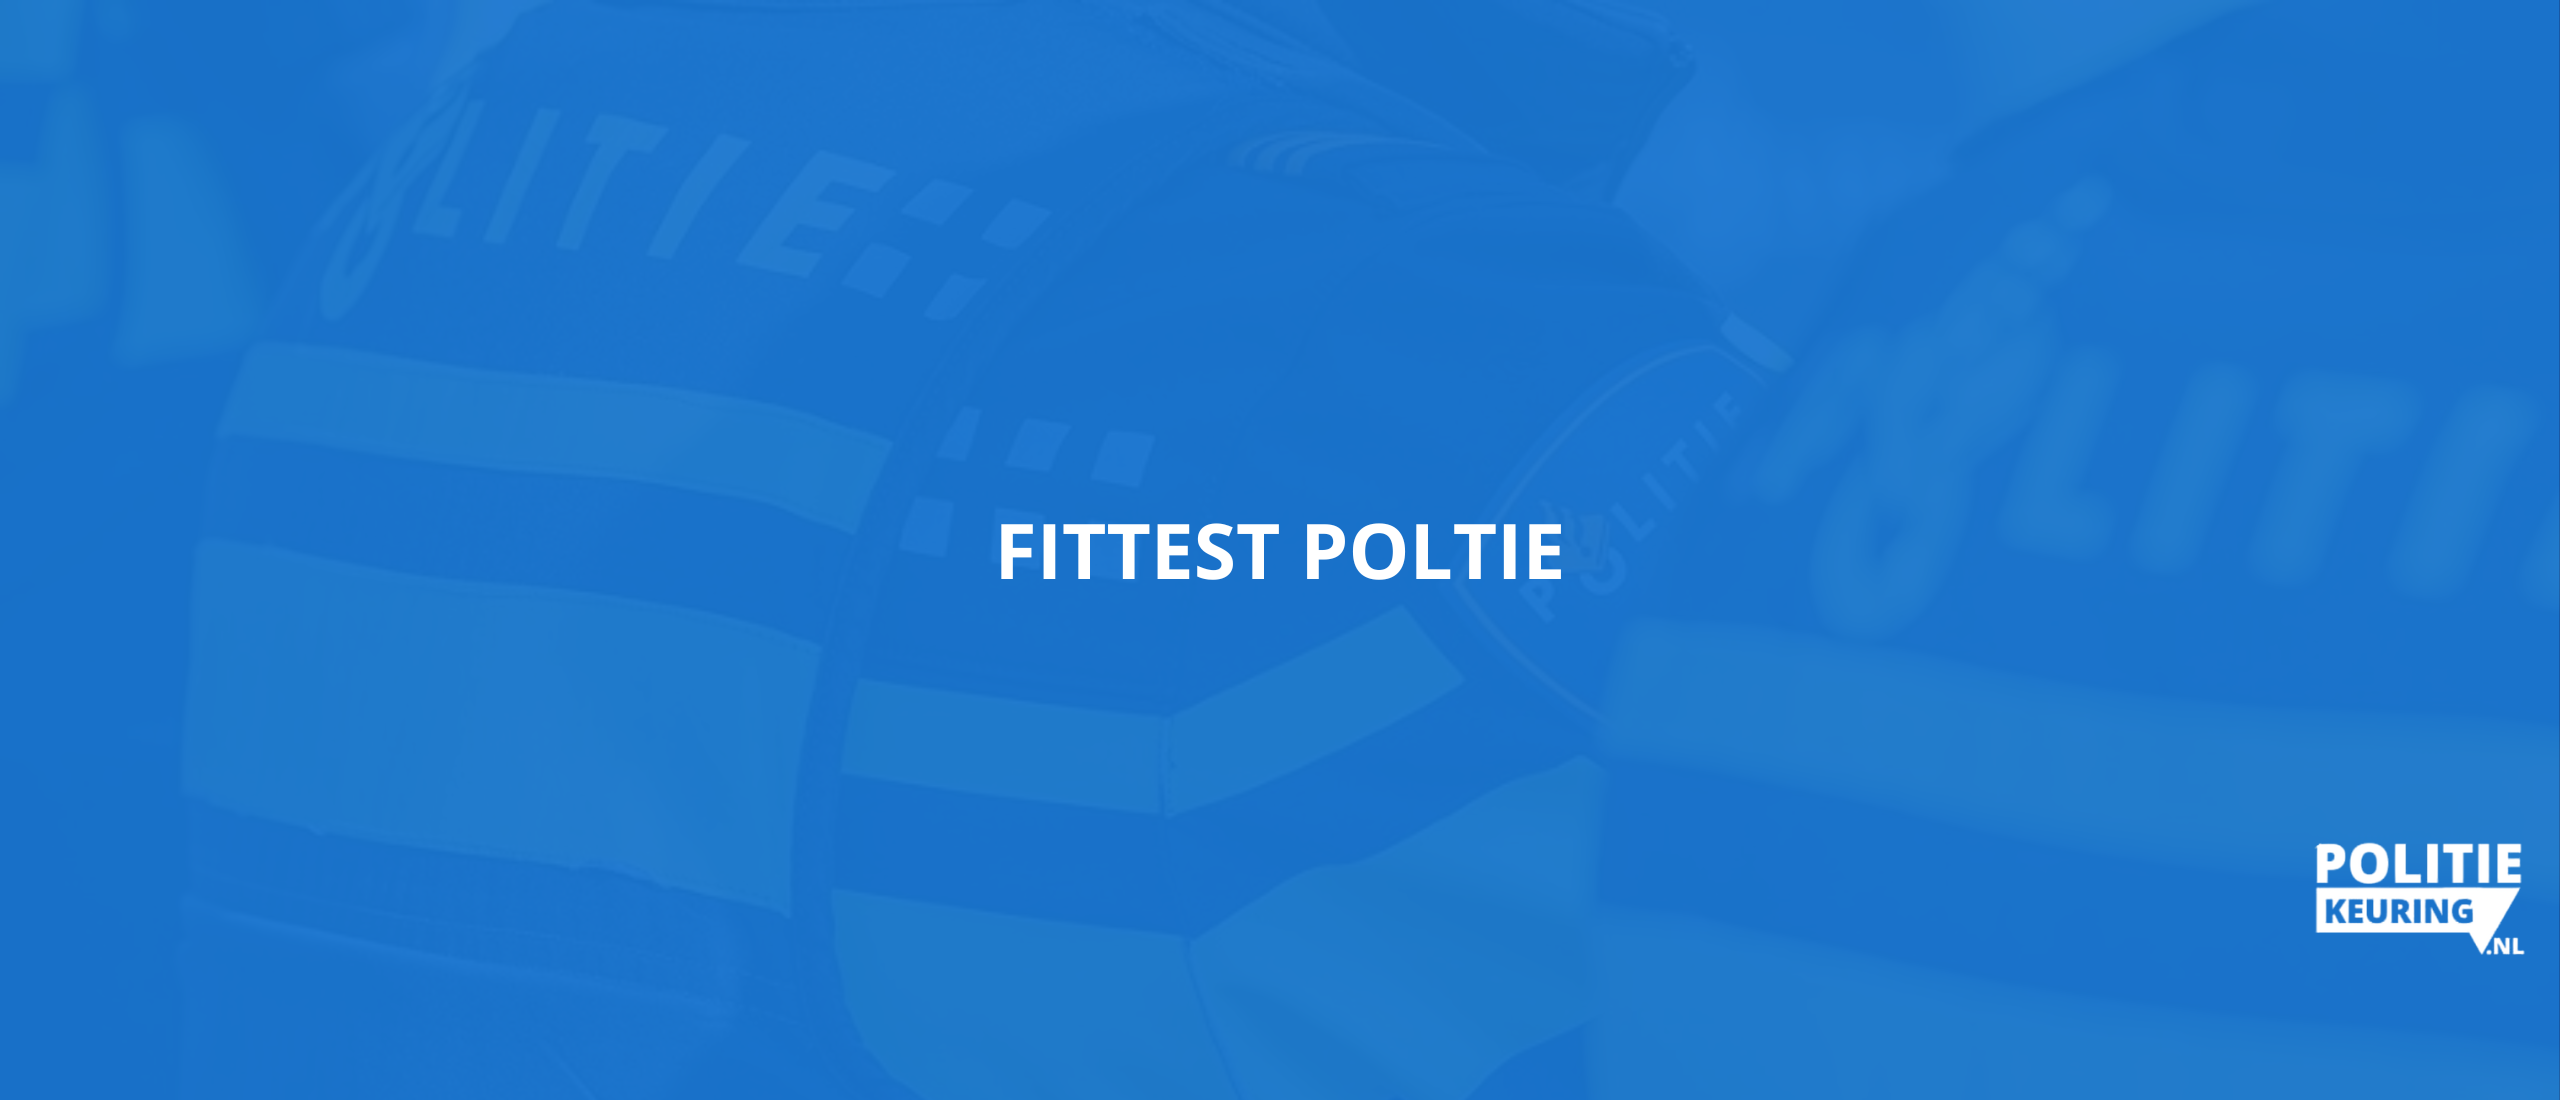 Fittest tips politie